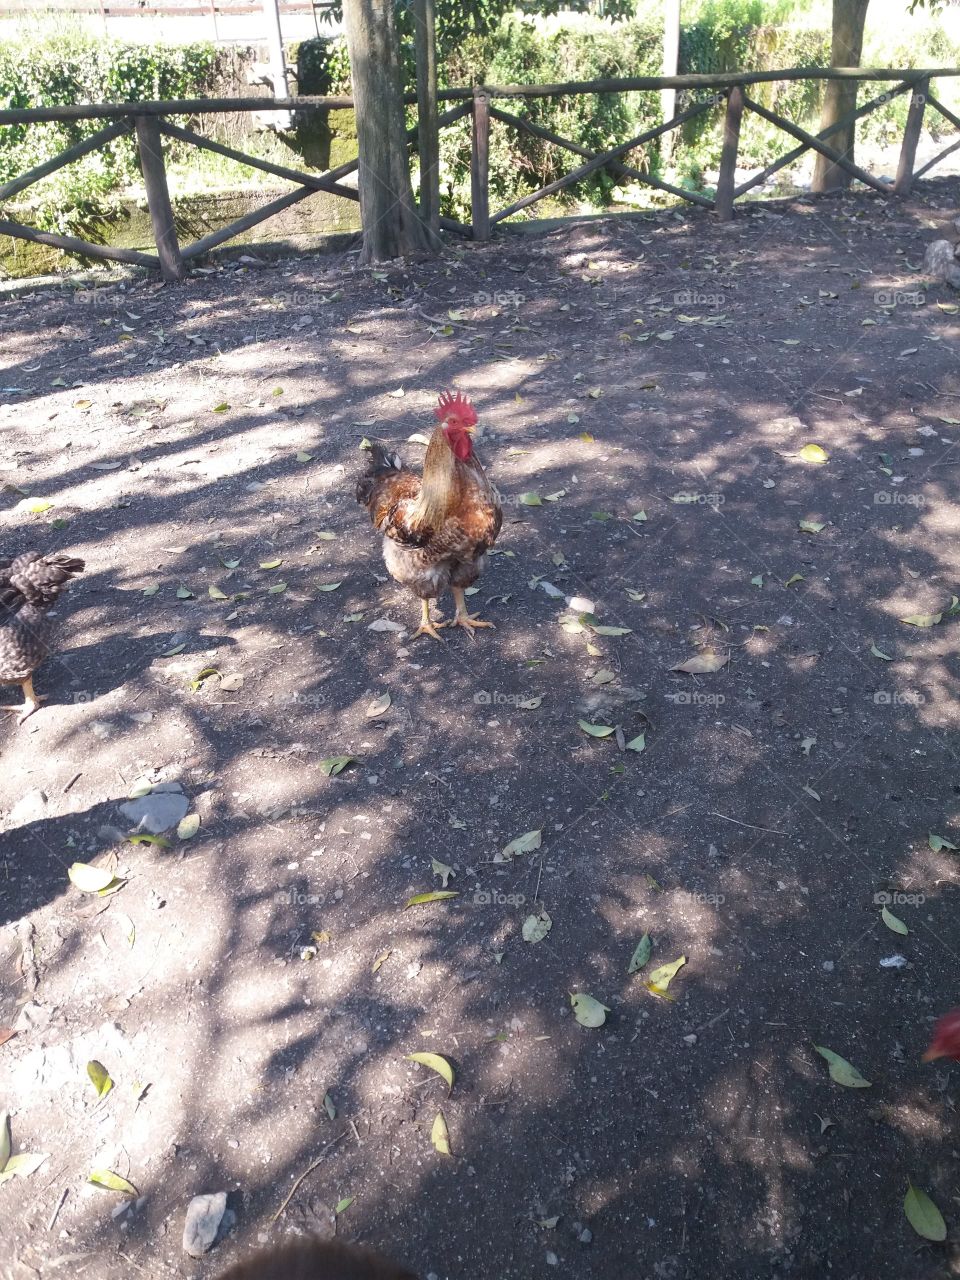 I know my chickens